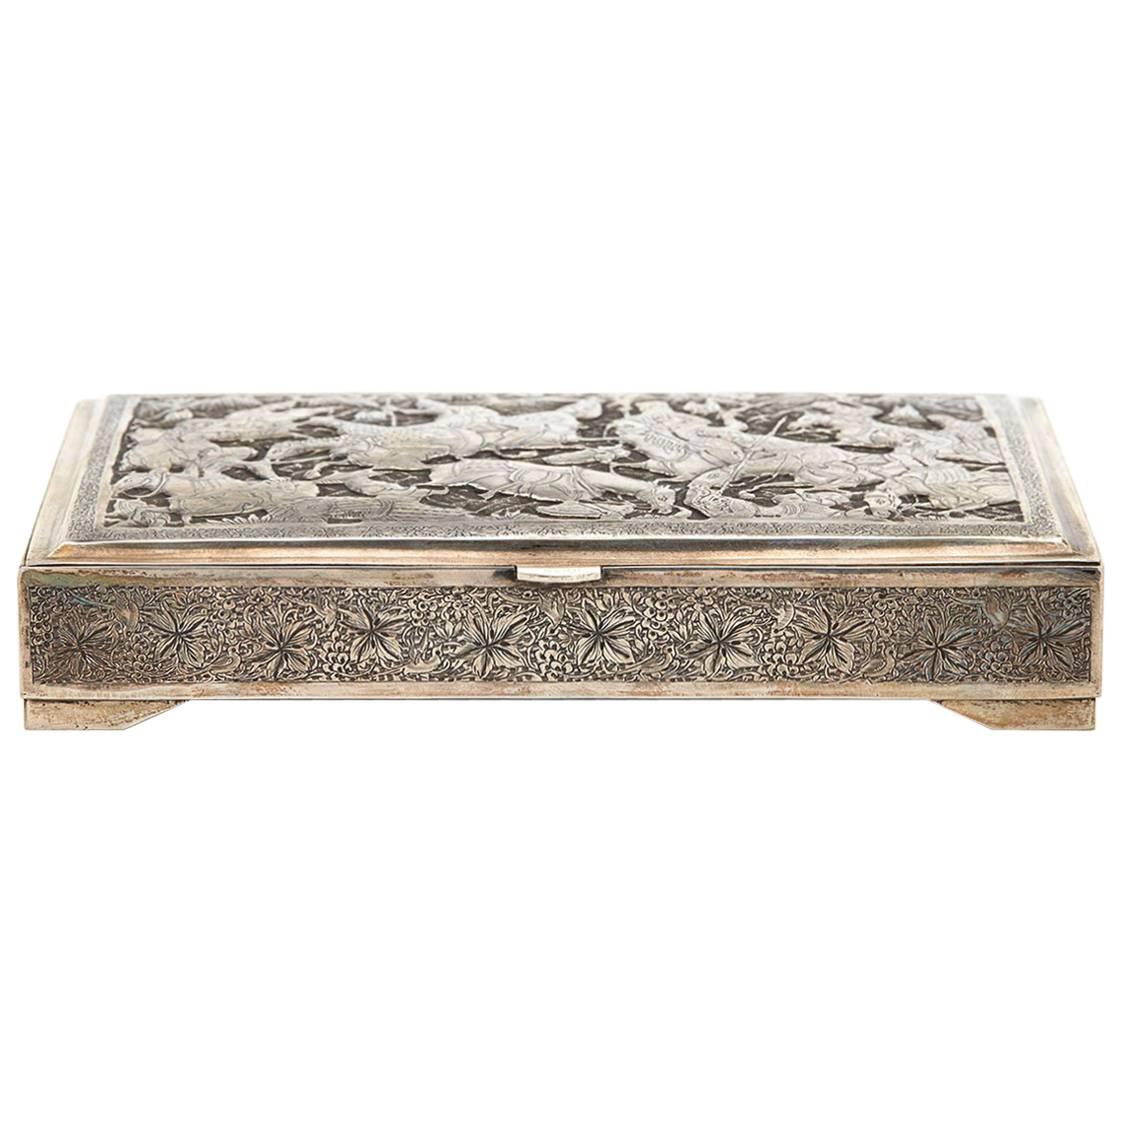 Antique Middle Eastern Silver Holy Casket 19th Century